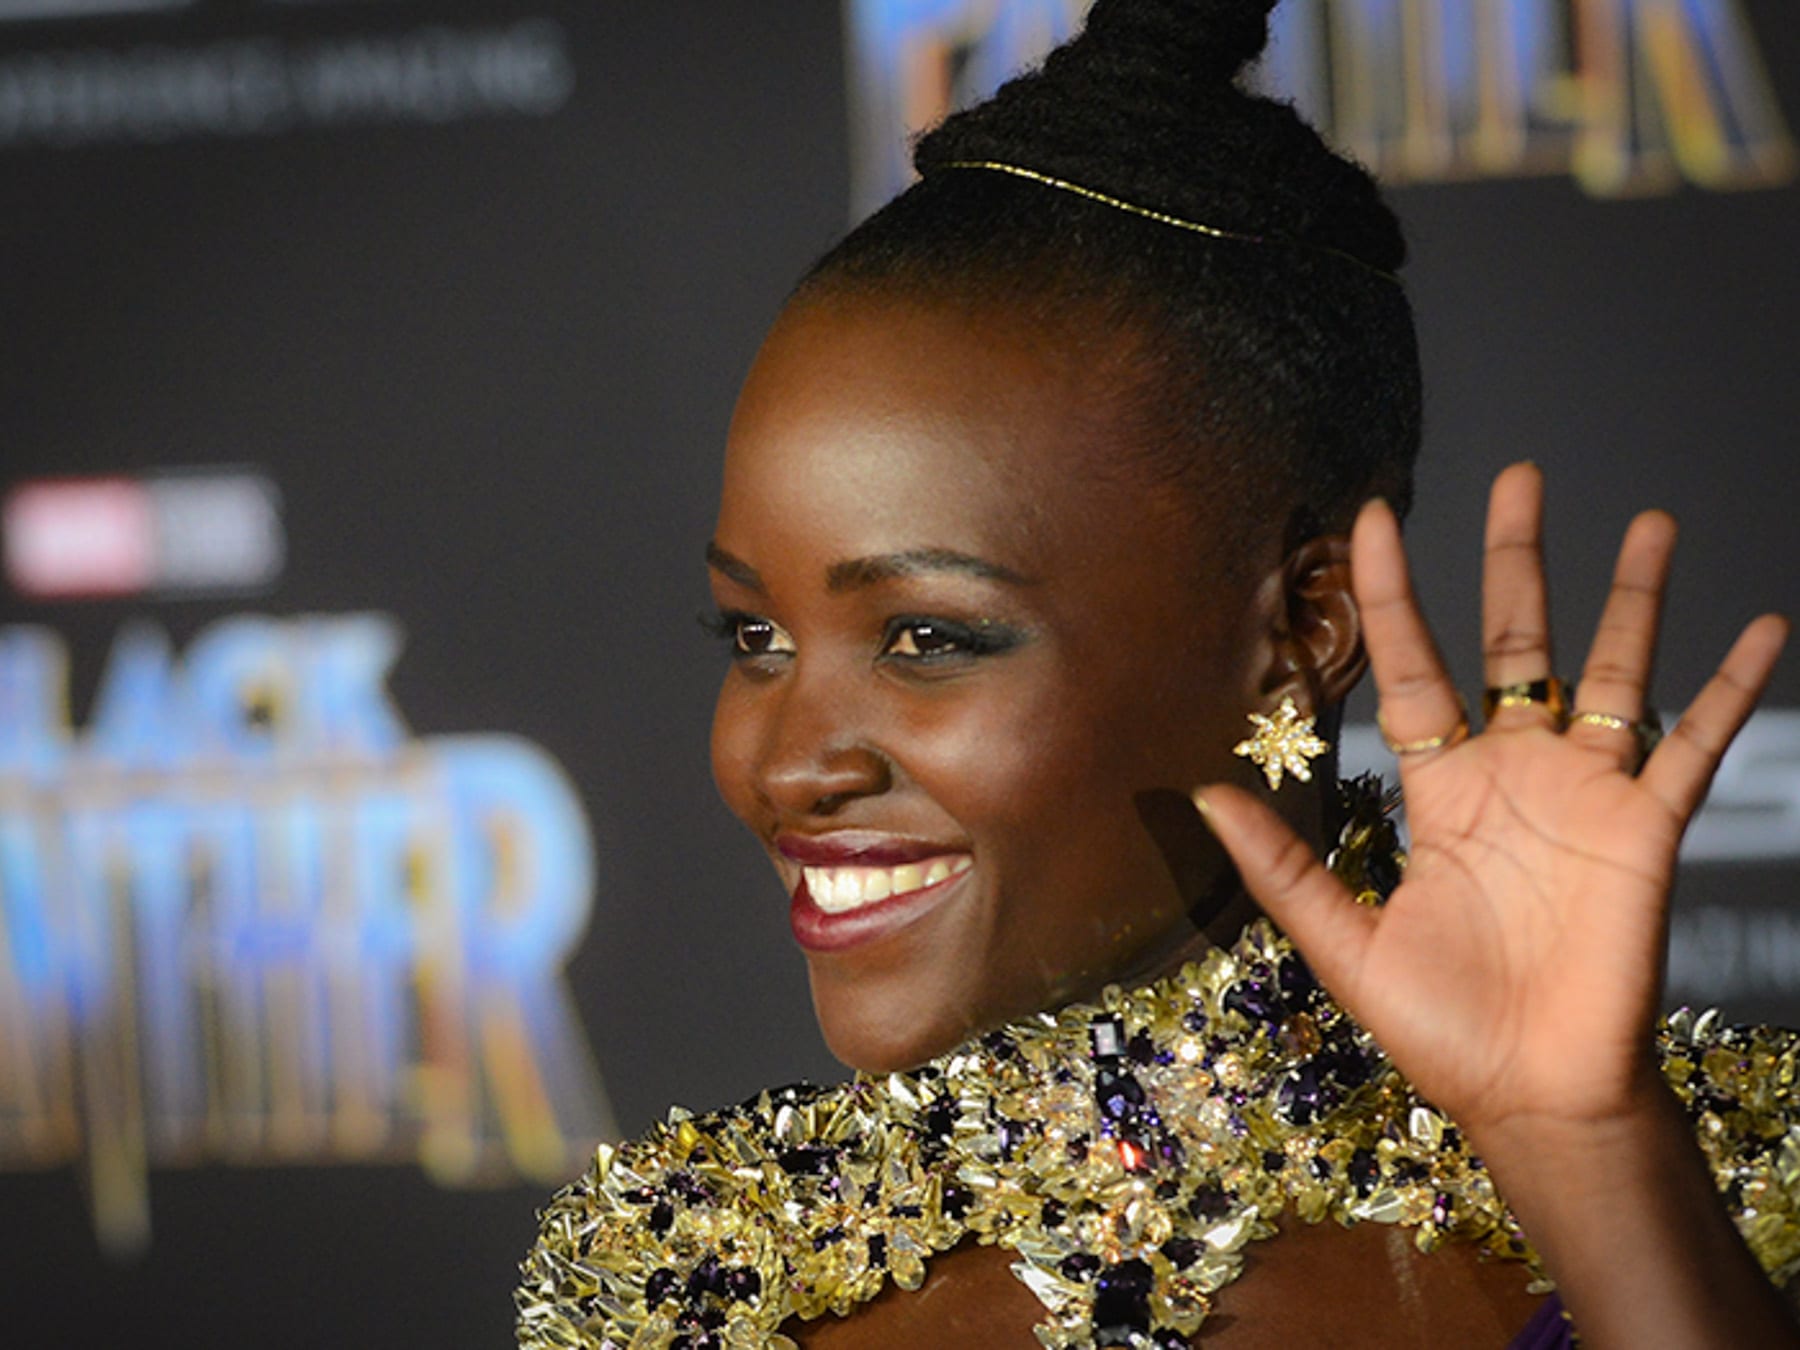 Lupita Nyong’o is a well-known Kenyan actress who won an Academy Award for her film debut in 12 Years a Slave (2013) and has appeared in many other hit movies.